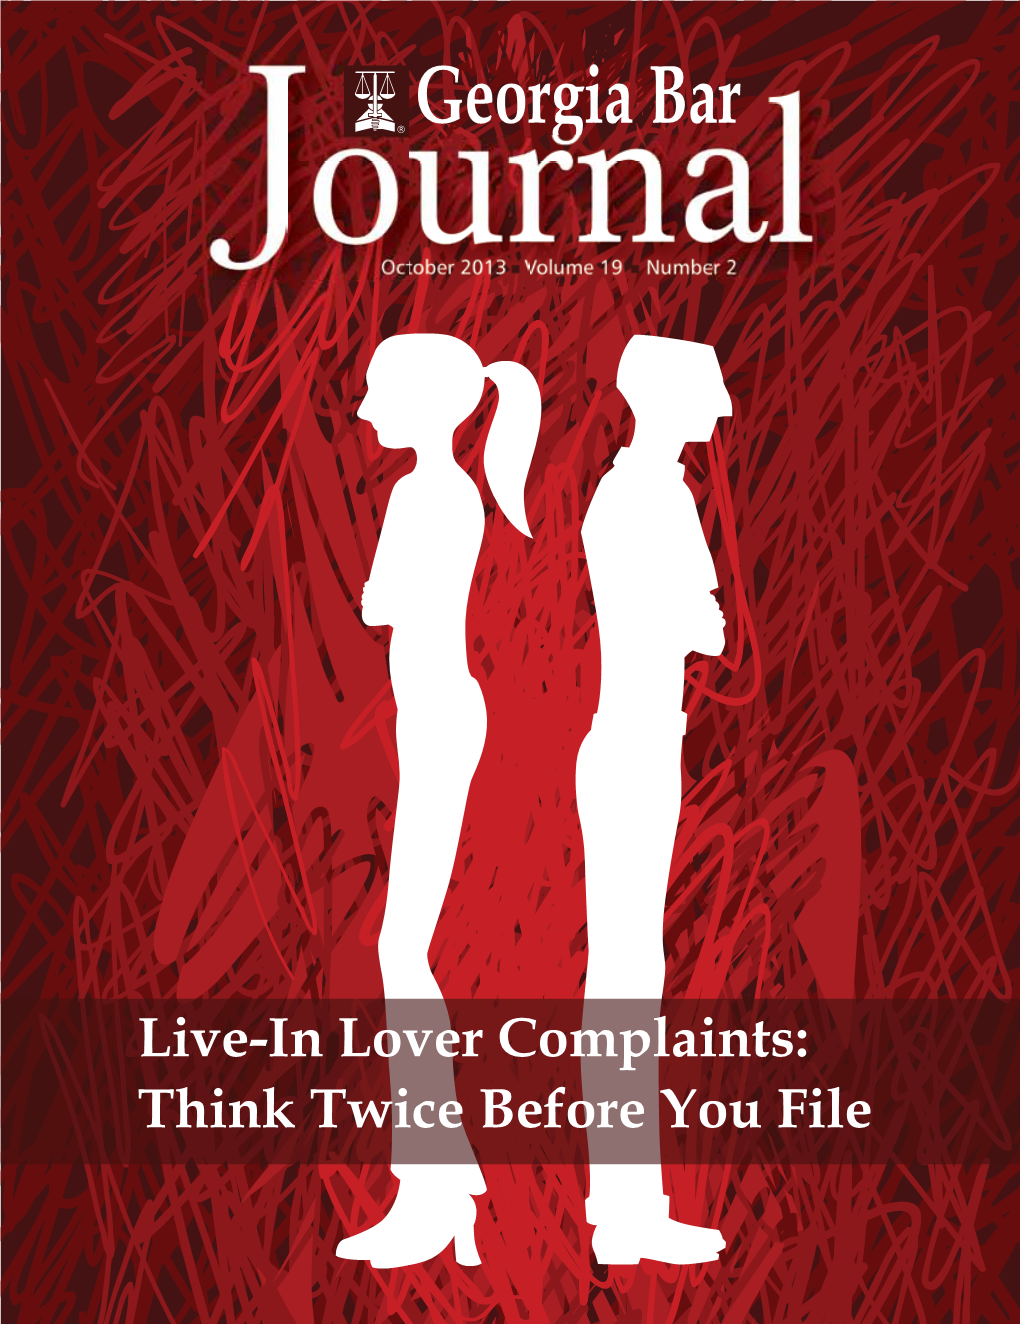 Live-In Lover Complaints: Think Twice Before You File How Does Your Firm Face Risk?